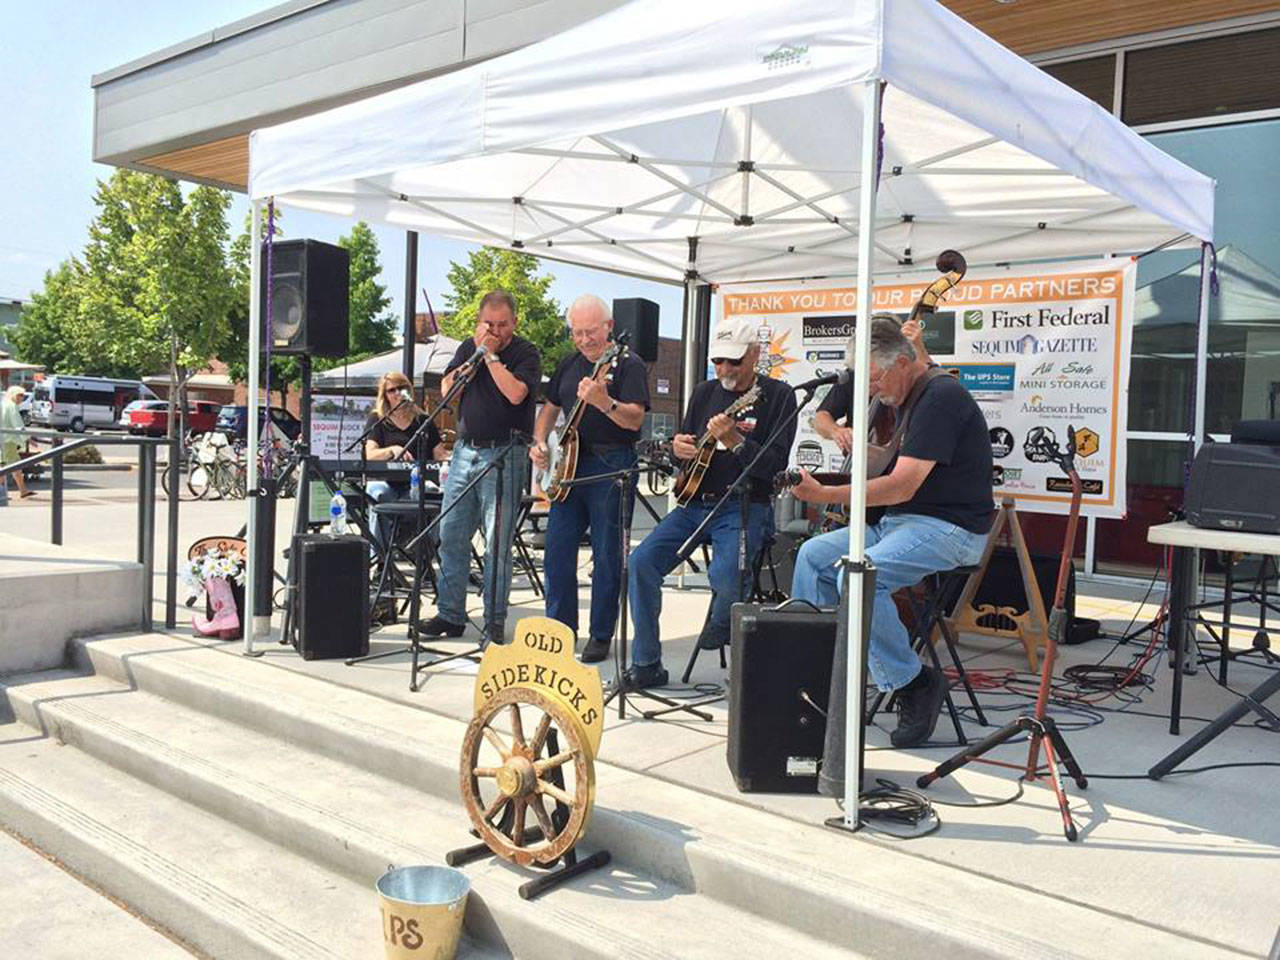 What’s New at the Market: Summer Live Music Series kicks off